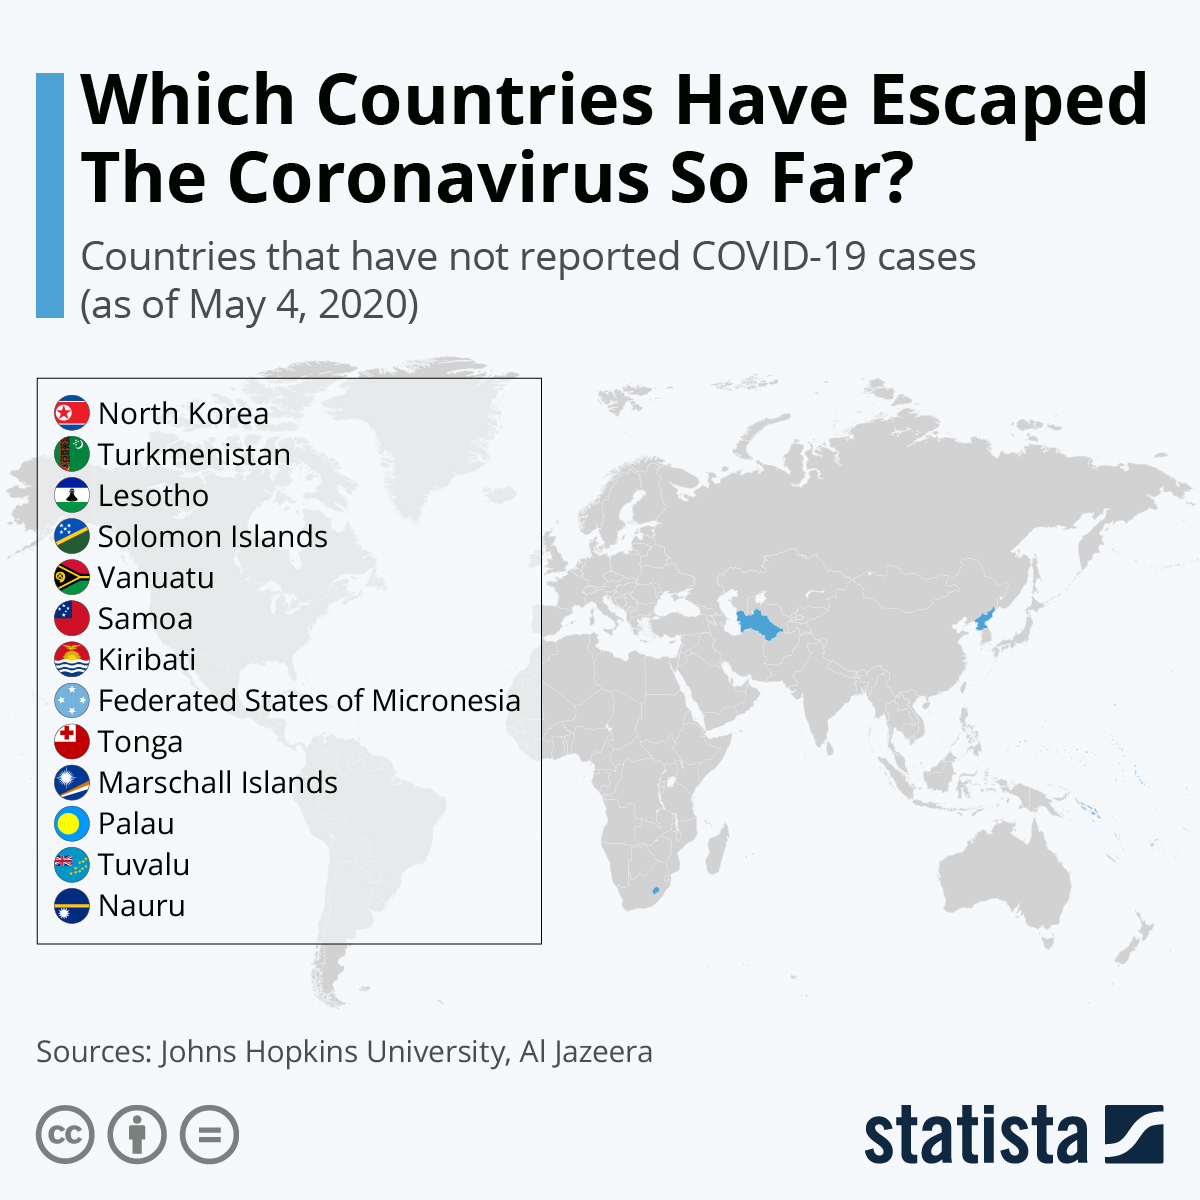 Which Countries Have Escaped The Coronavirus So Far?